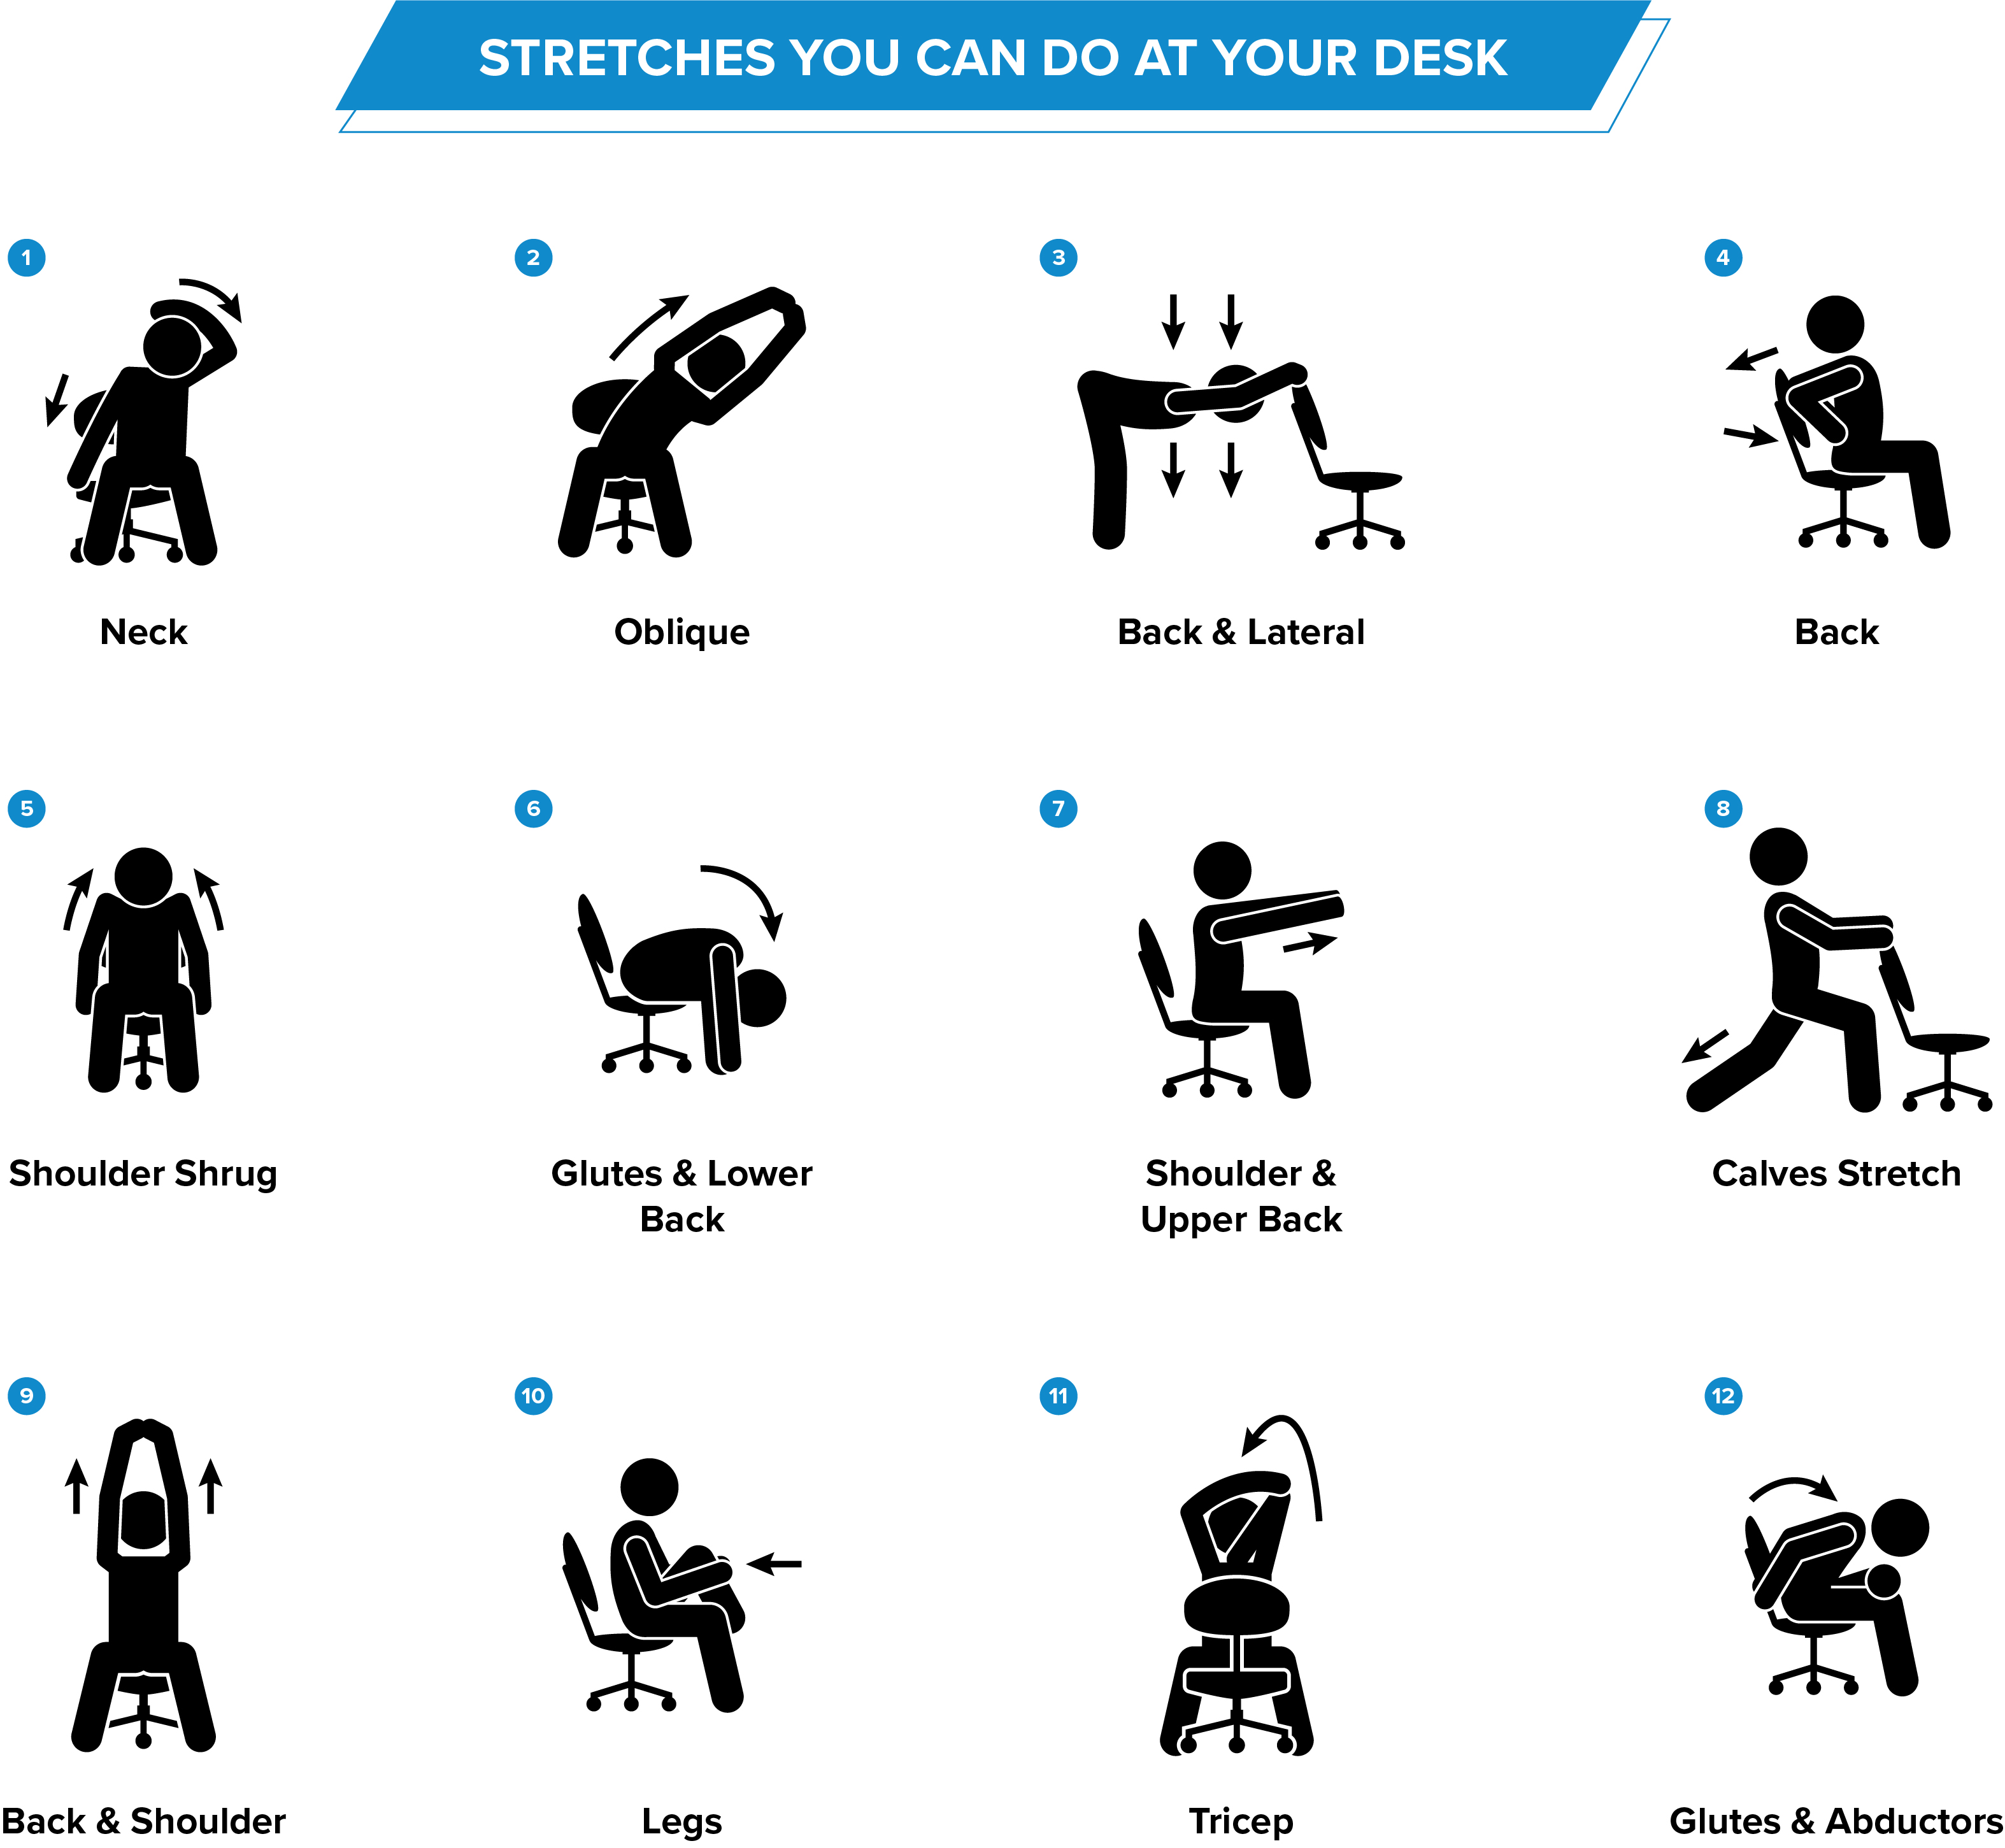  An image showing 12 different stretches you can do at your desk.